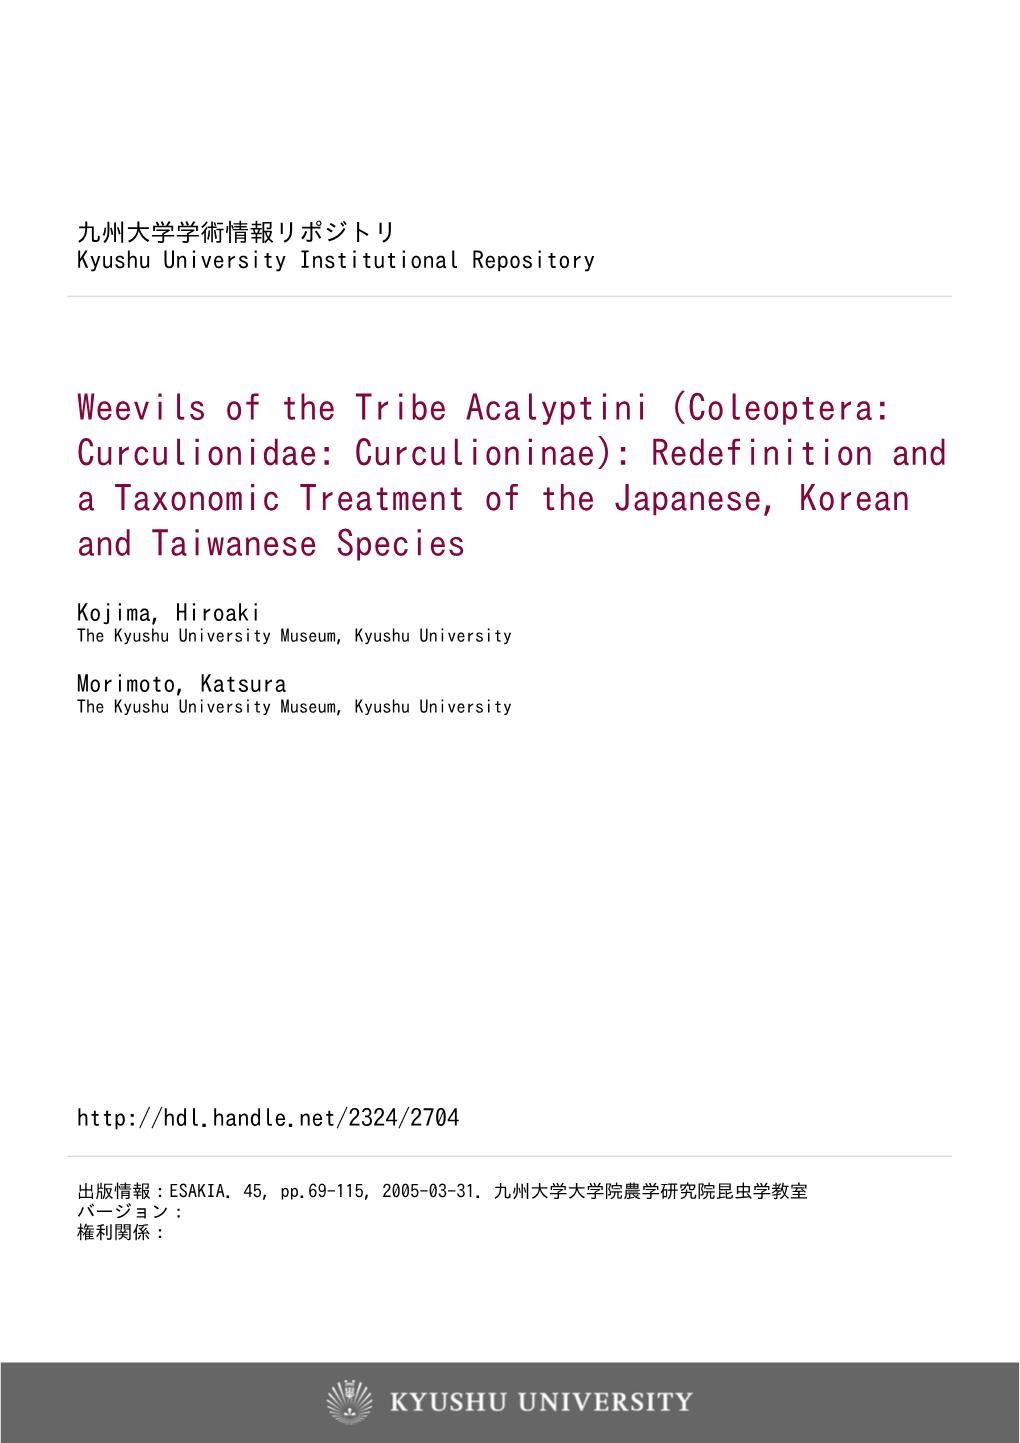 Weevils of the Tribe Acalyptini (Coleoptera: Curculionidae: Curculioninae): Redefinition and a Taxonomic Treatment of the Japanese, Korean and Taiwanese Species